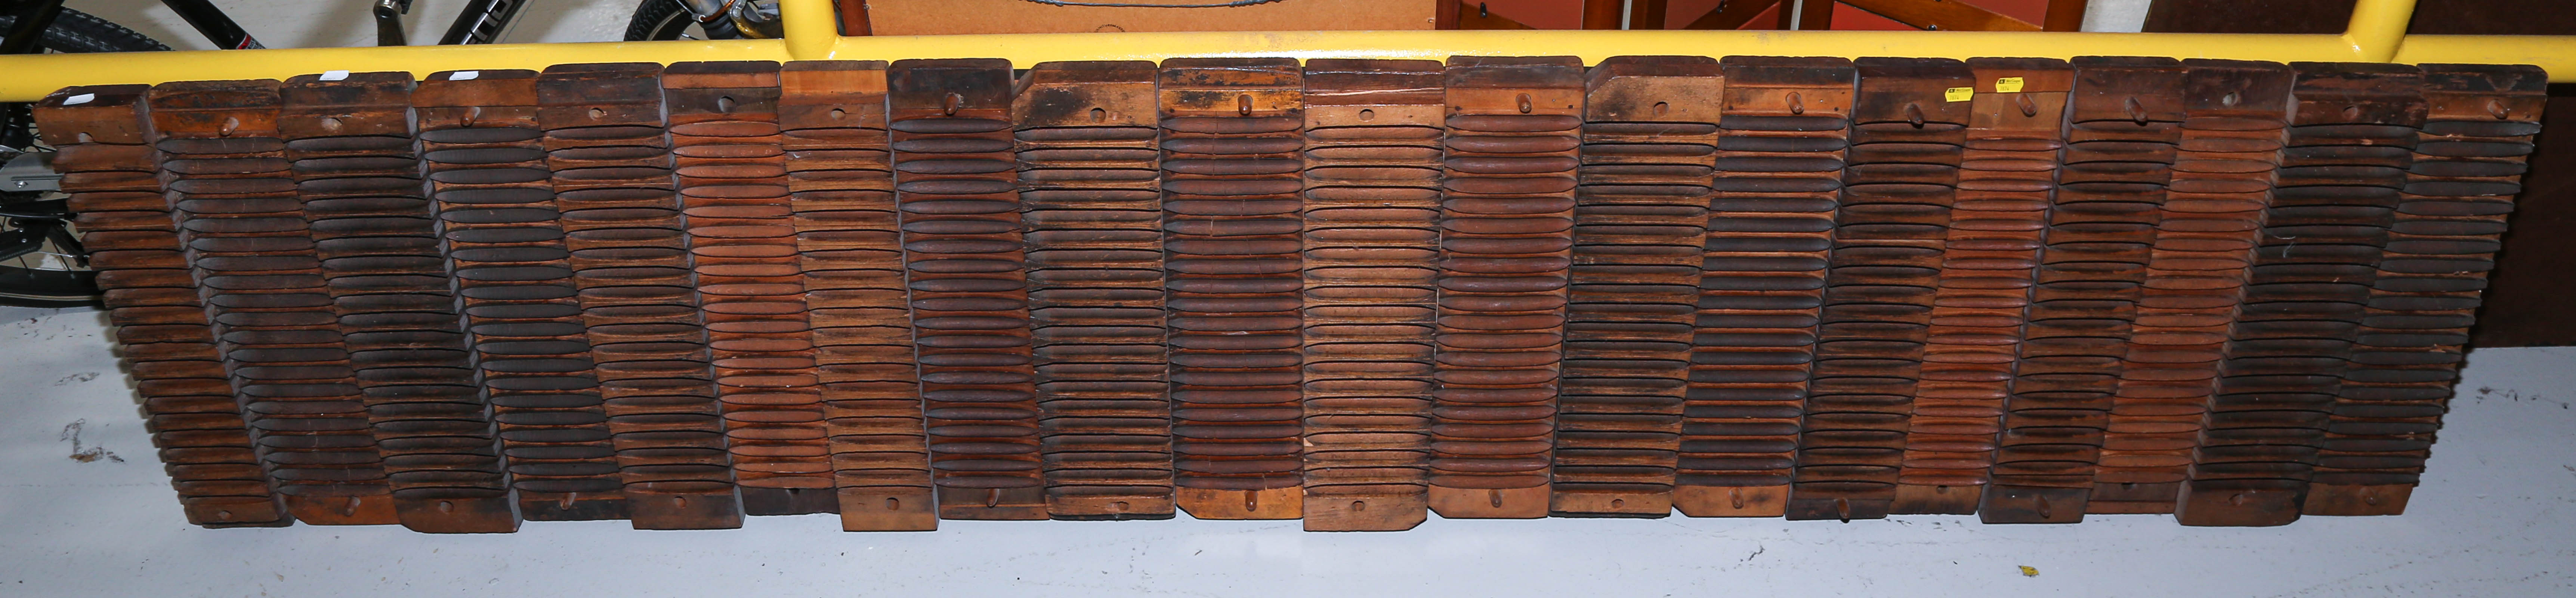 LARGE GROUP OF ANTIQUE CIGAR MOLDS 2e9896